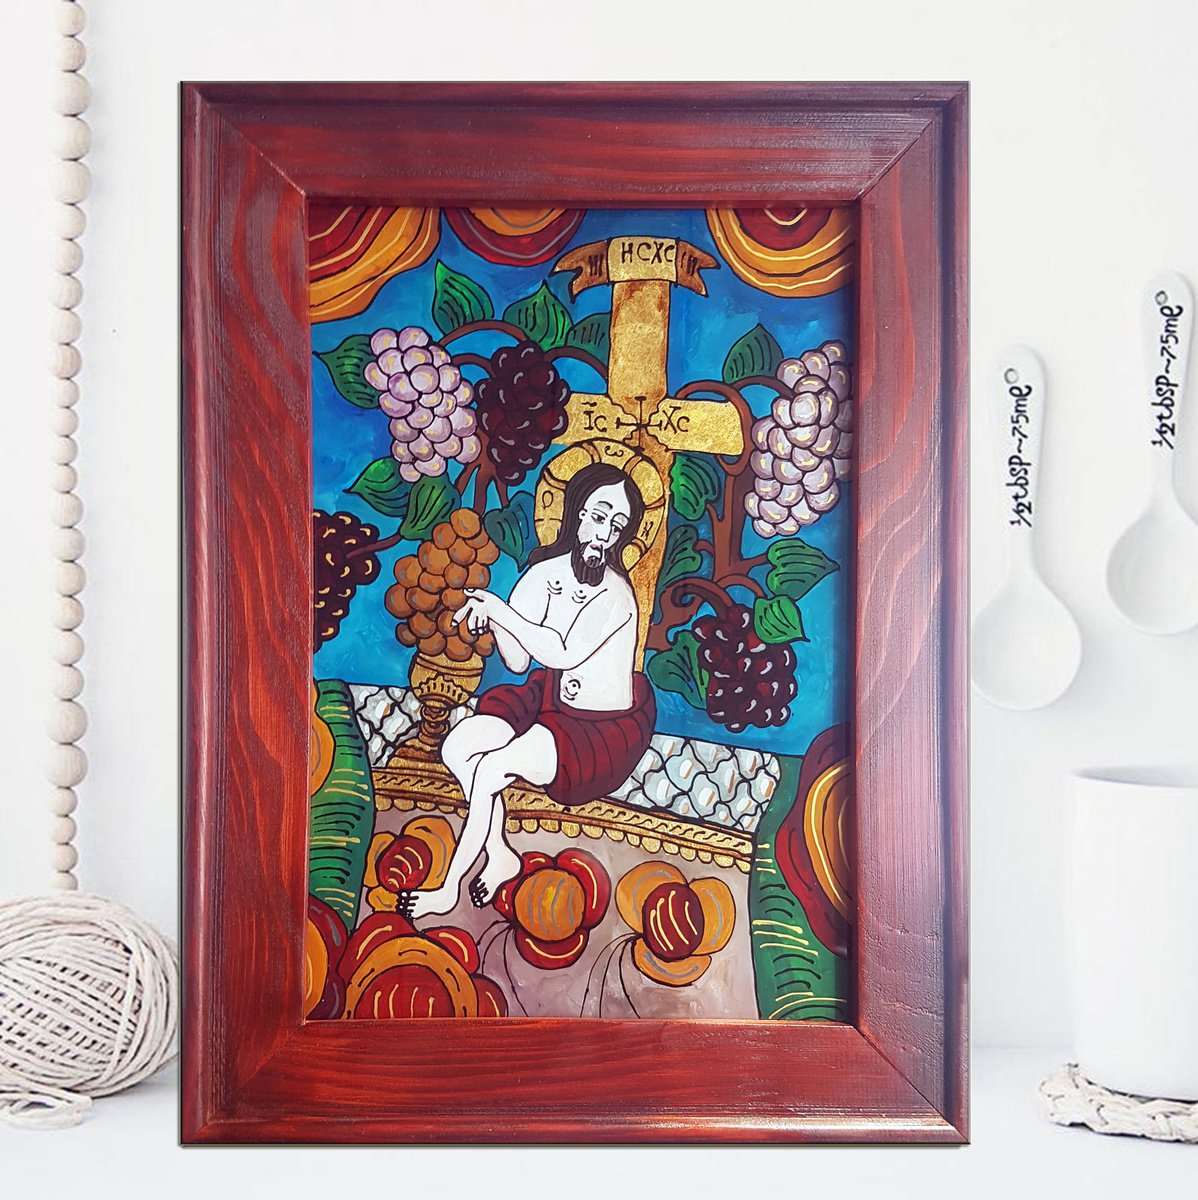 Jesus with Vines - Romanian Traditional Folk Icon Reverse Side Technique on Acrylic Glass by Adriana Vasile